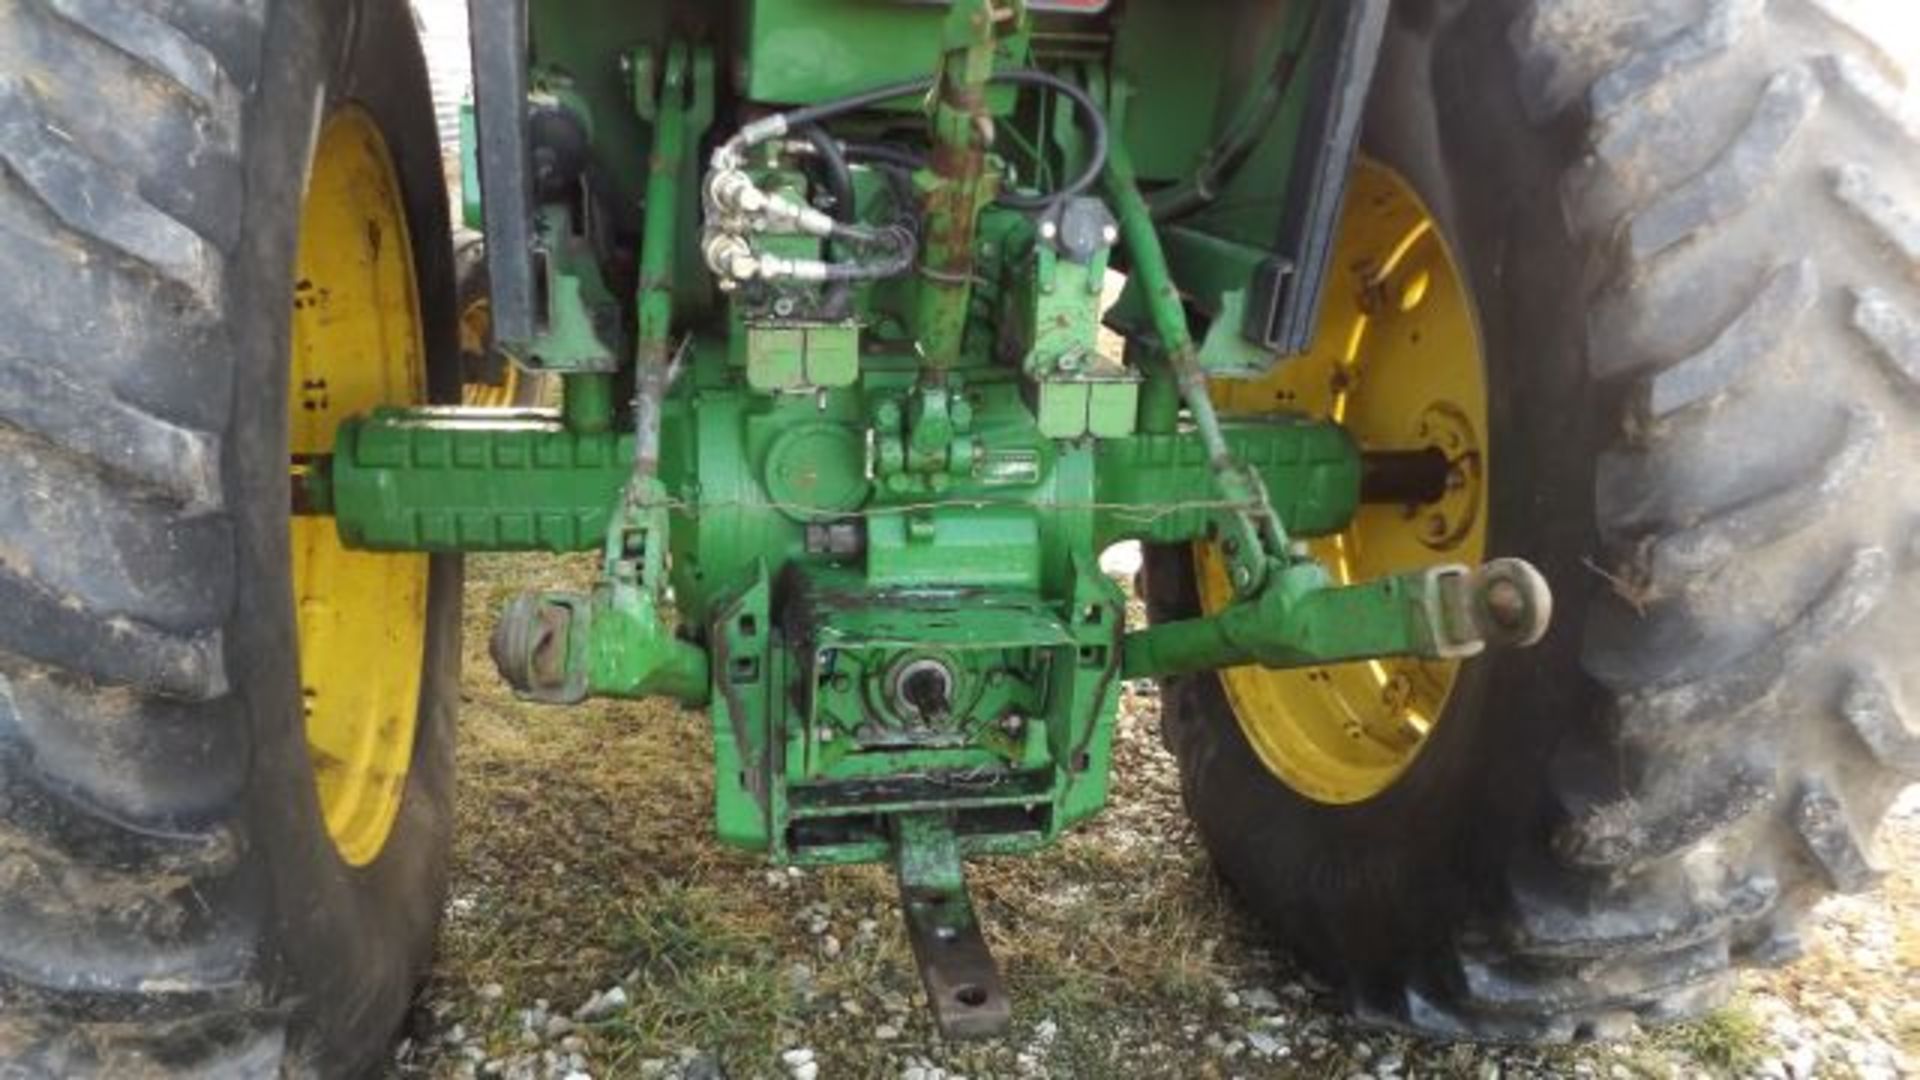 1981 JD 4240 Tractor, 7956 Hrs., CAH, QR, w/721 NSL Loader, 18.4x38 Clamp on Duals, Sr#4240H022008 - Image 2 of 5